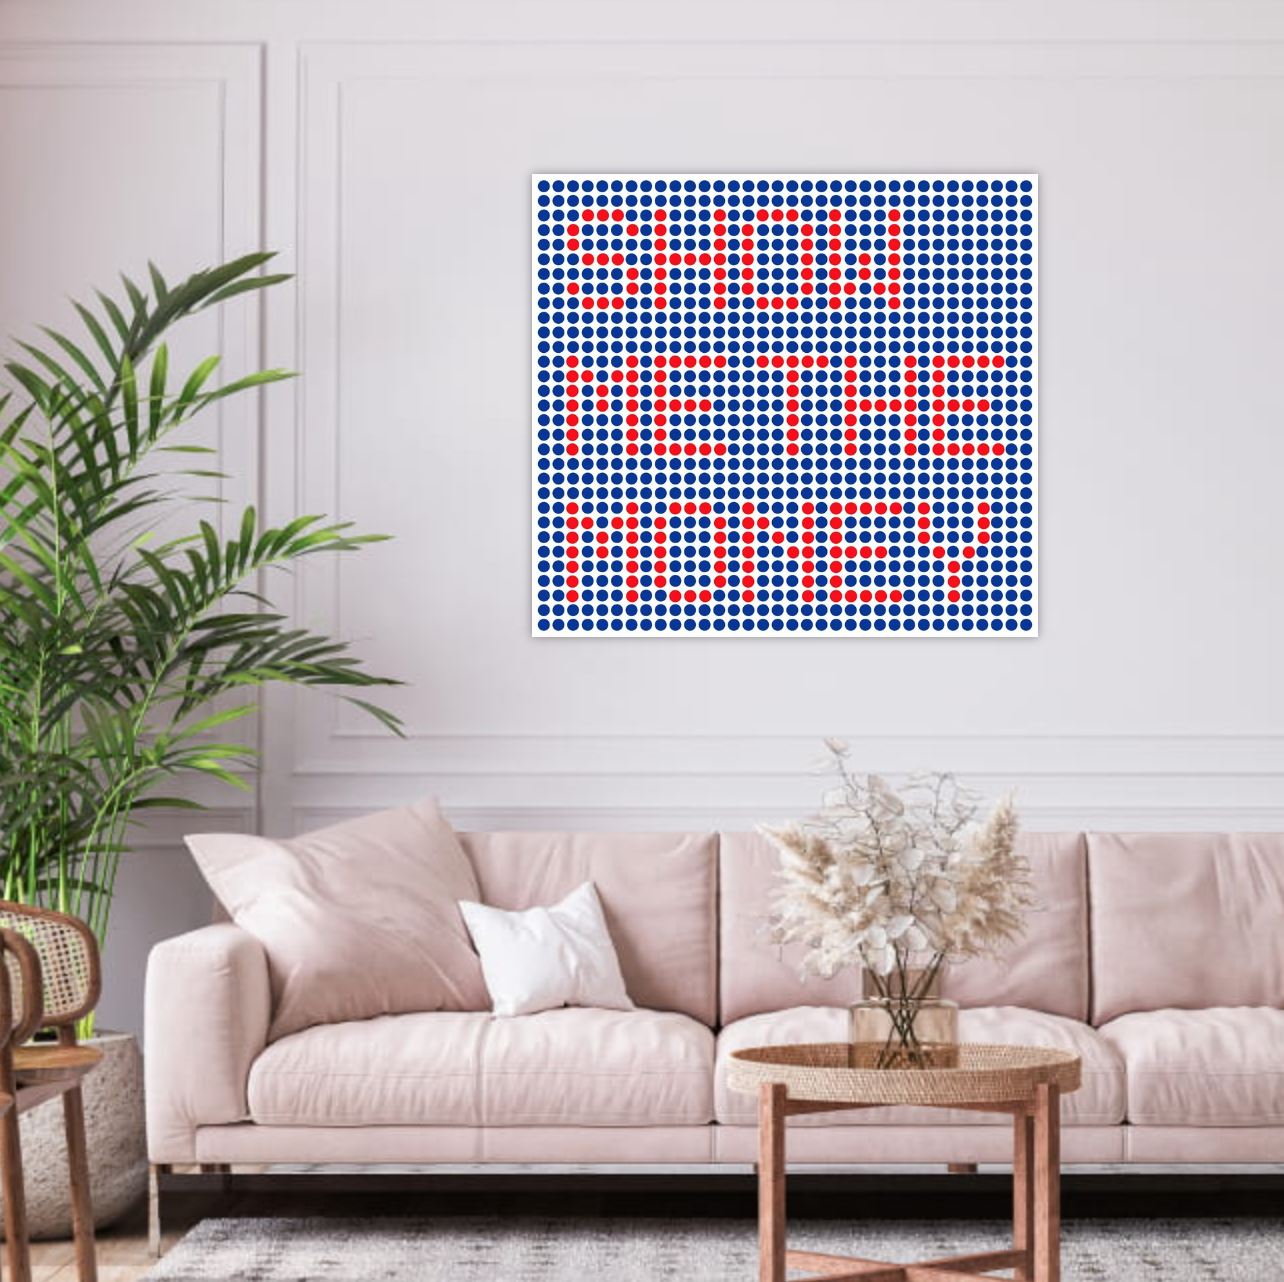 Gucci or Louis Vuitton? Dot painting by Dimitri Likissas